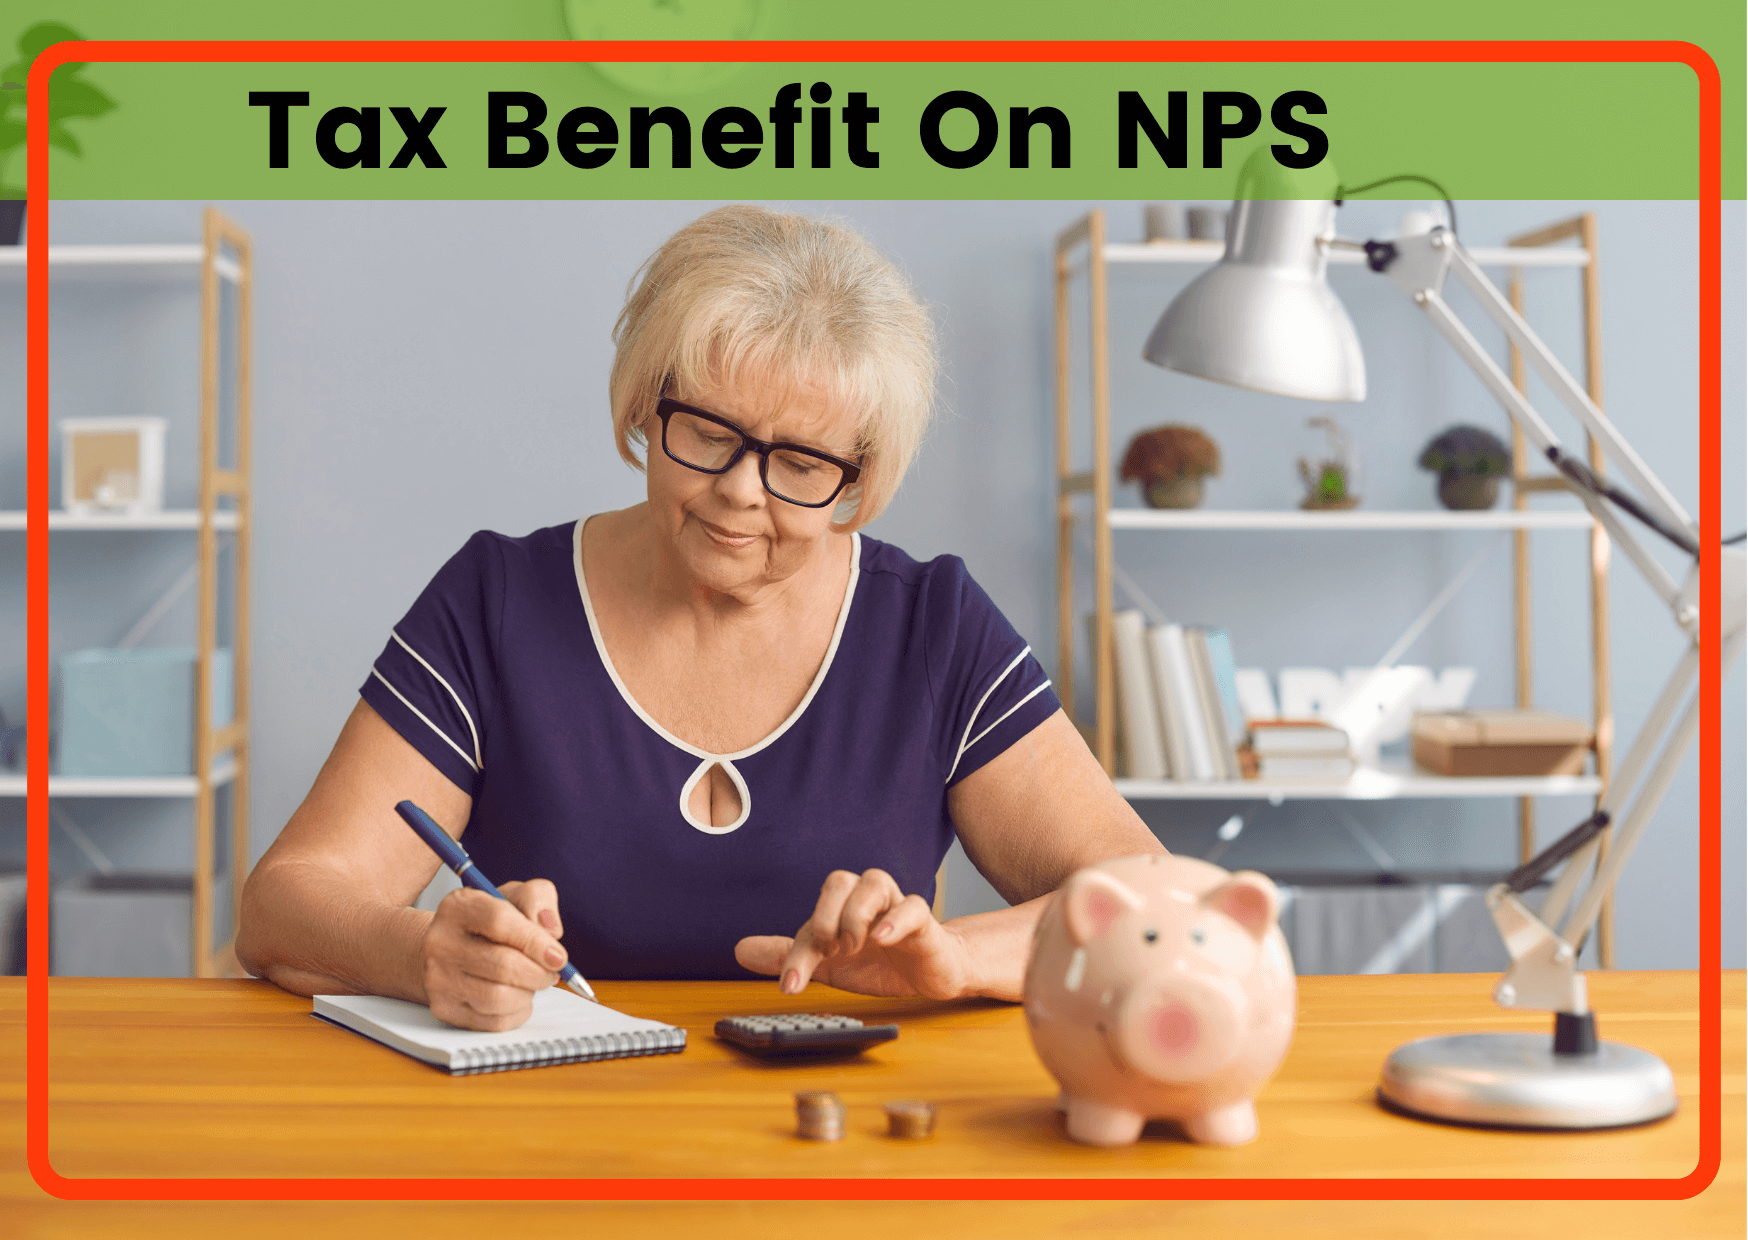 Nps Contribution Tax Benefit In New Regime